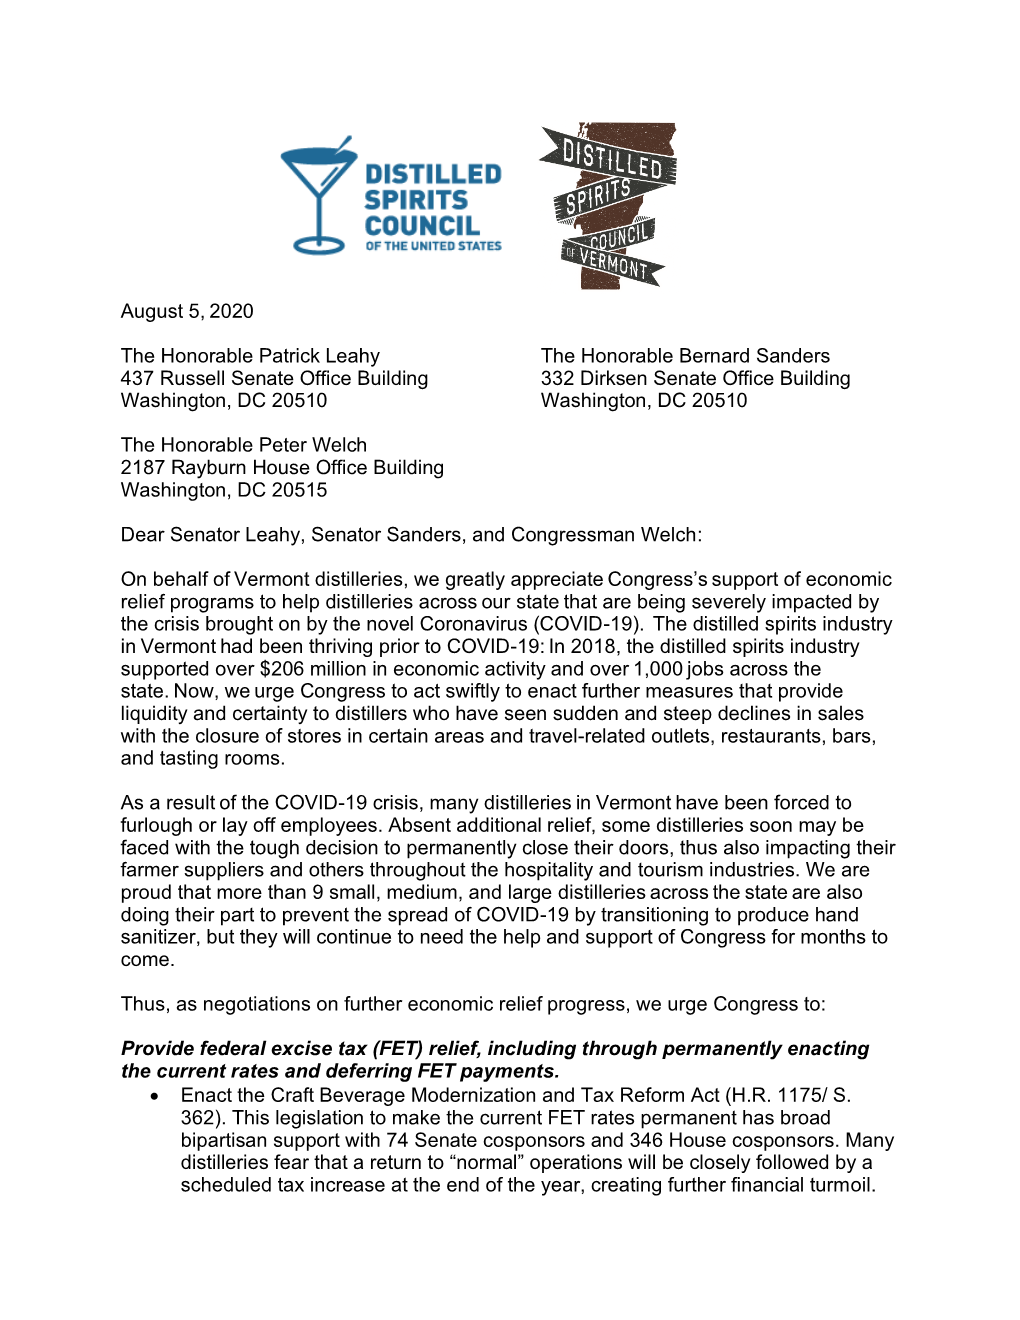 Joint Letter with Distilled Spirits Council of Vermont (August 2020)